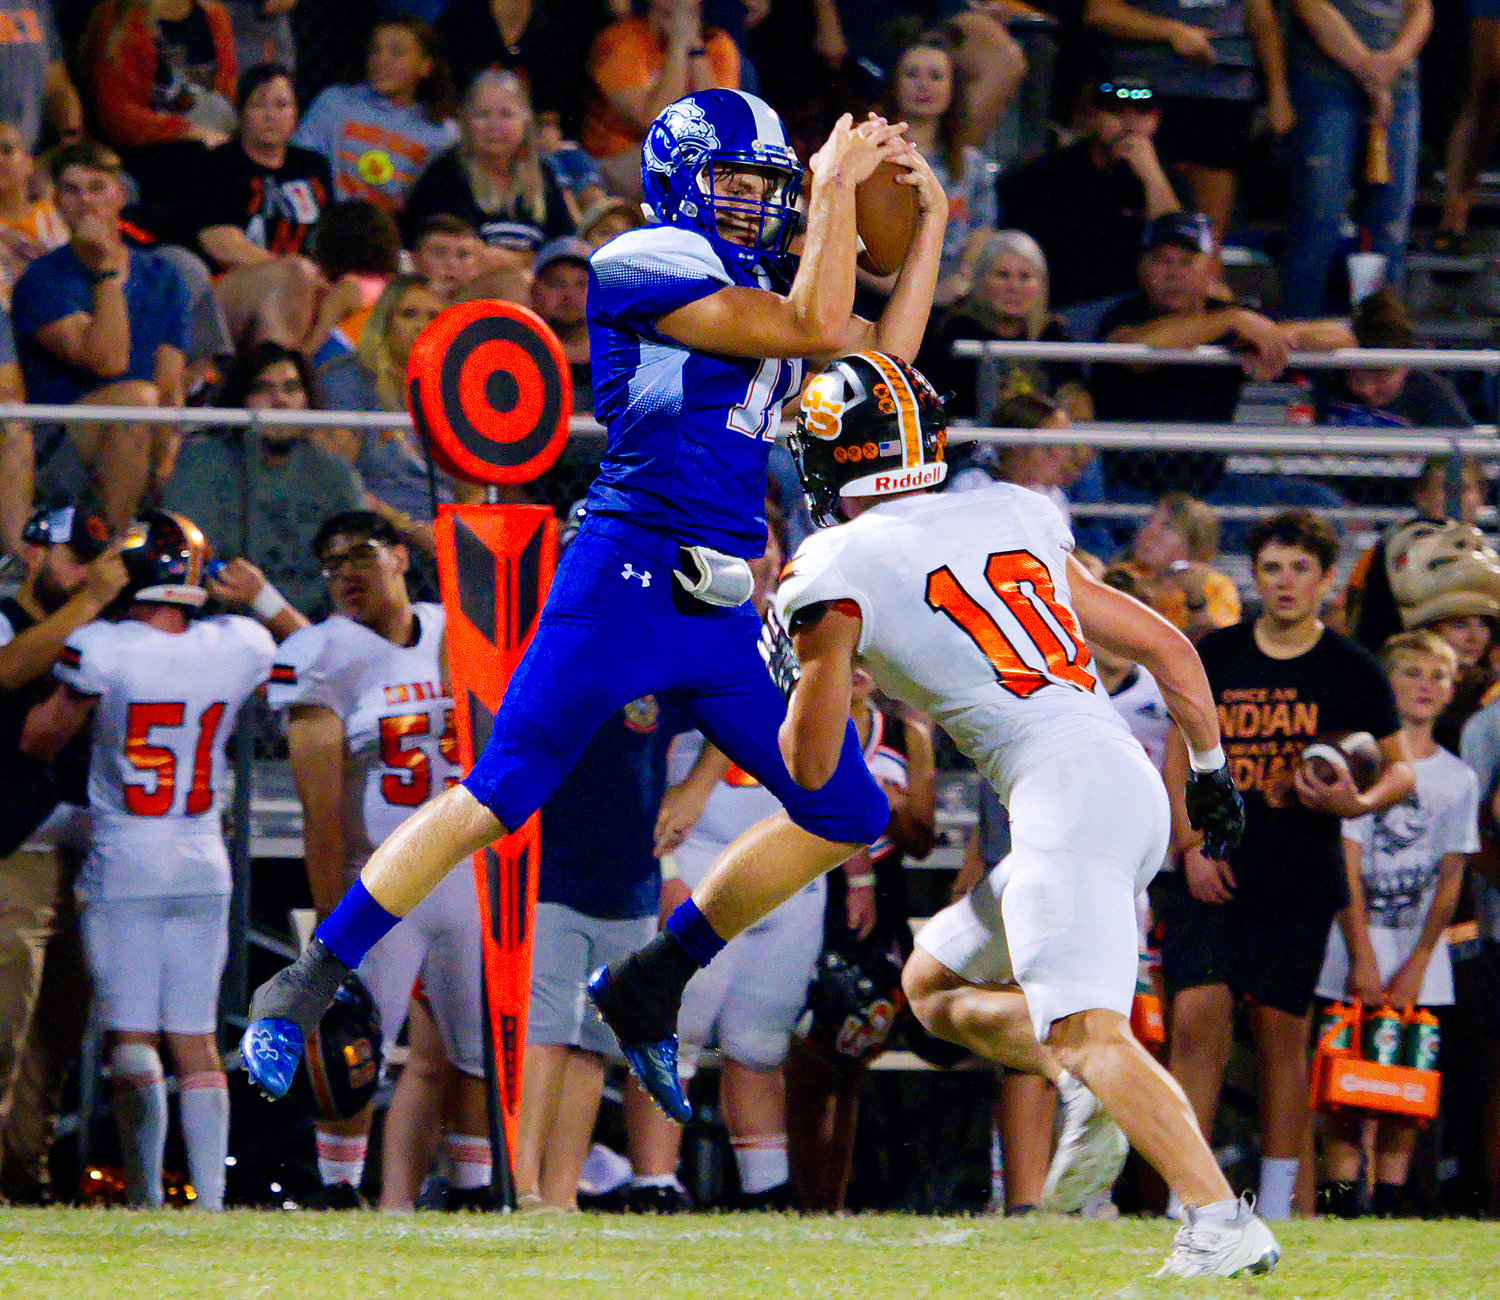 Klayton Meadows, named all-district utility player of the year, catches a streak pass Sept. 23. versus Grand Saline.